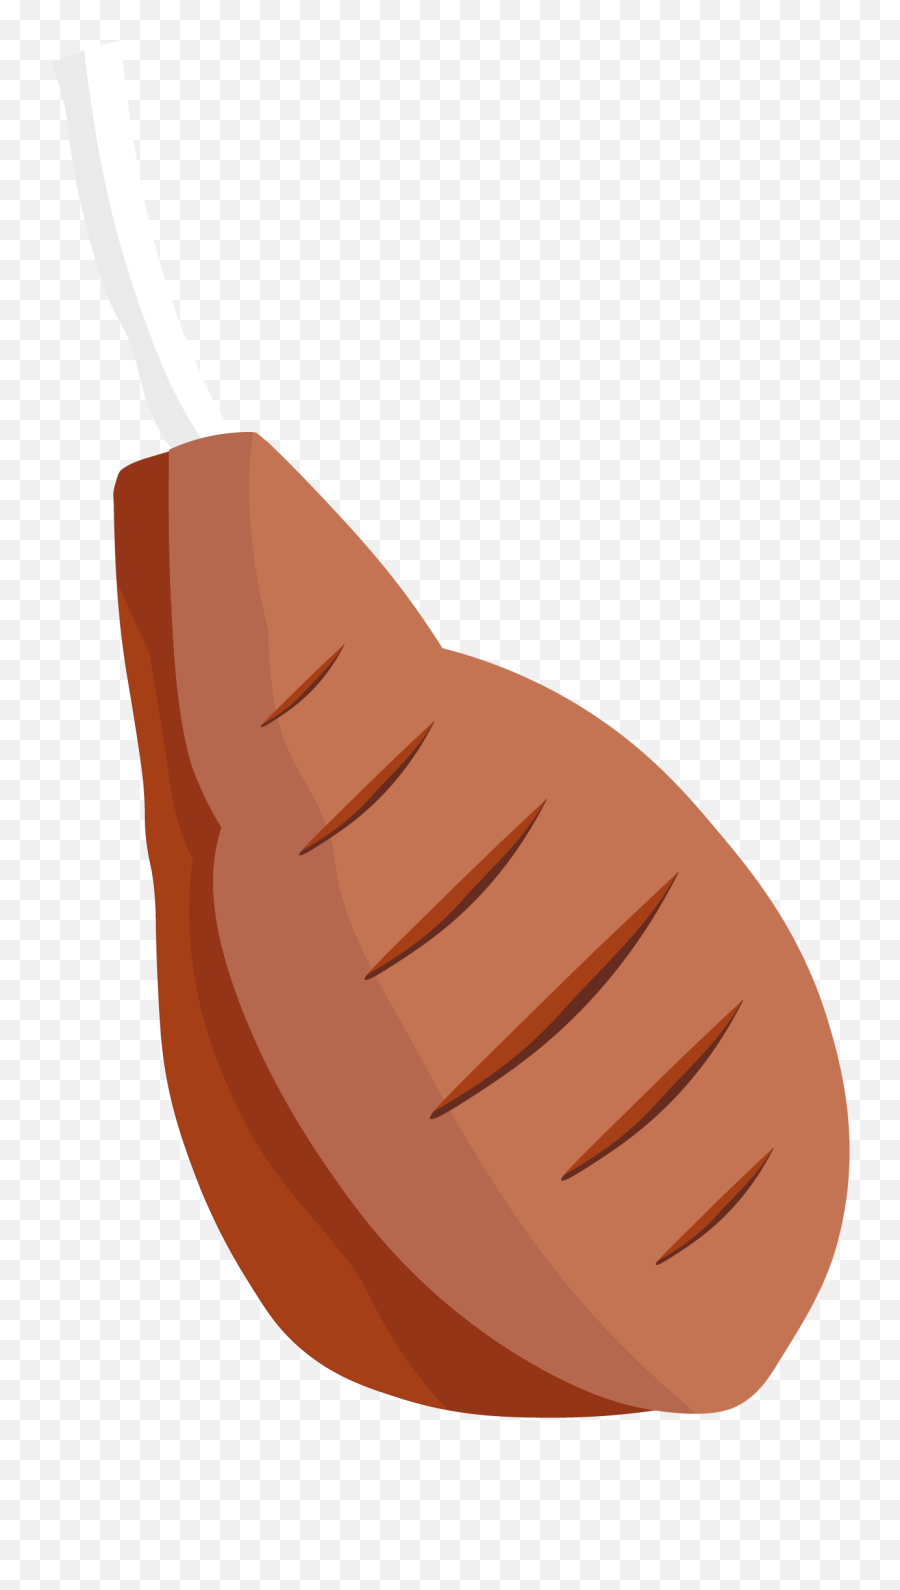 What Goes Into Your Dogs Food About Us Naturediet Emoji,Sweet Potato Emoji